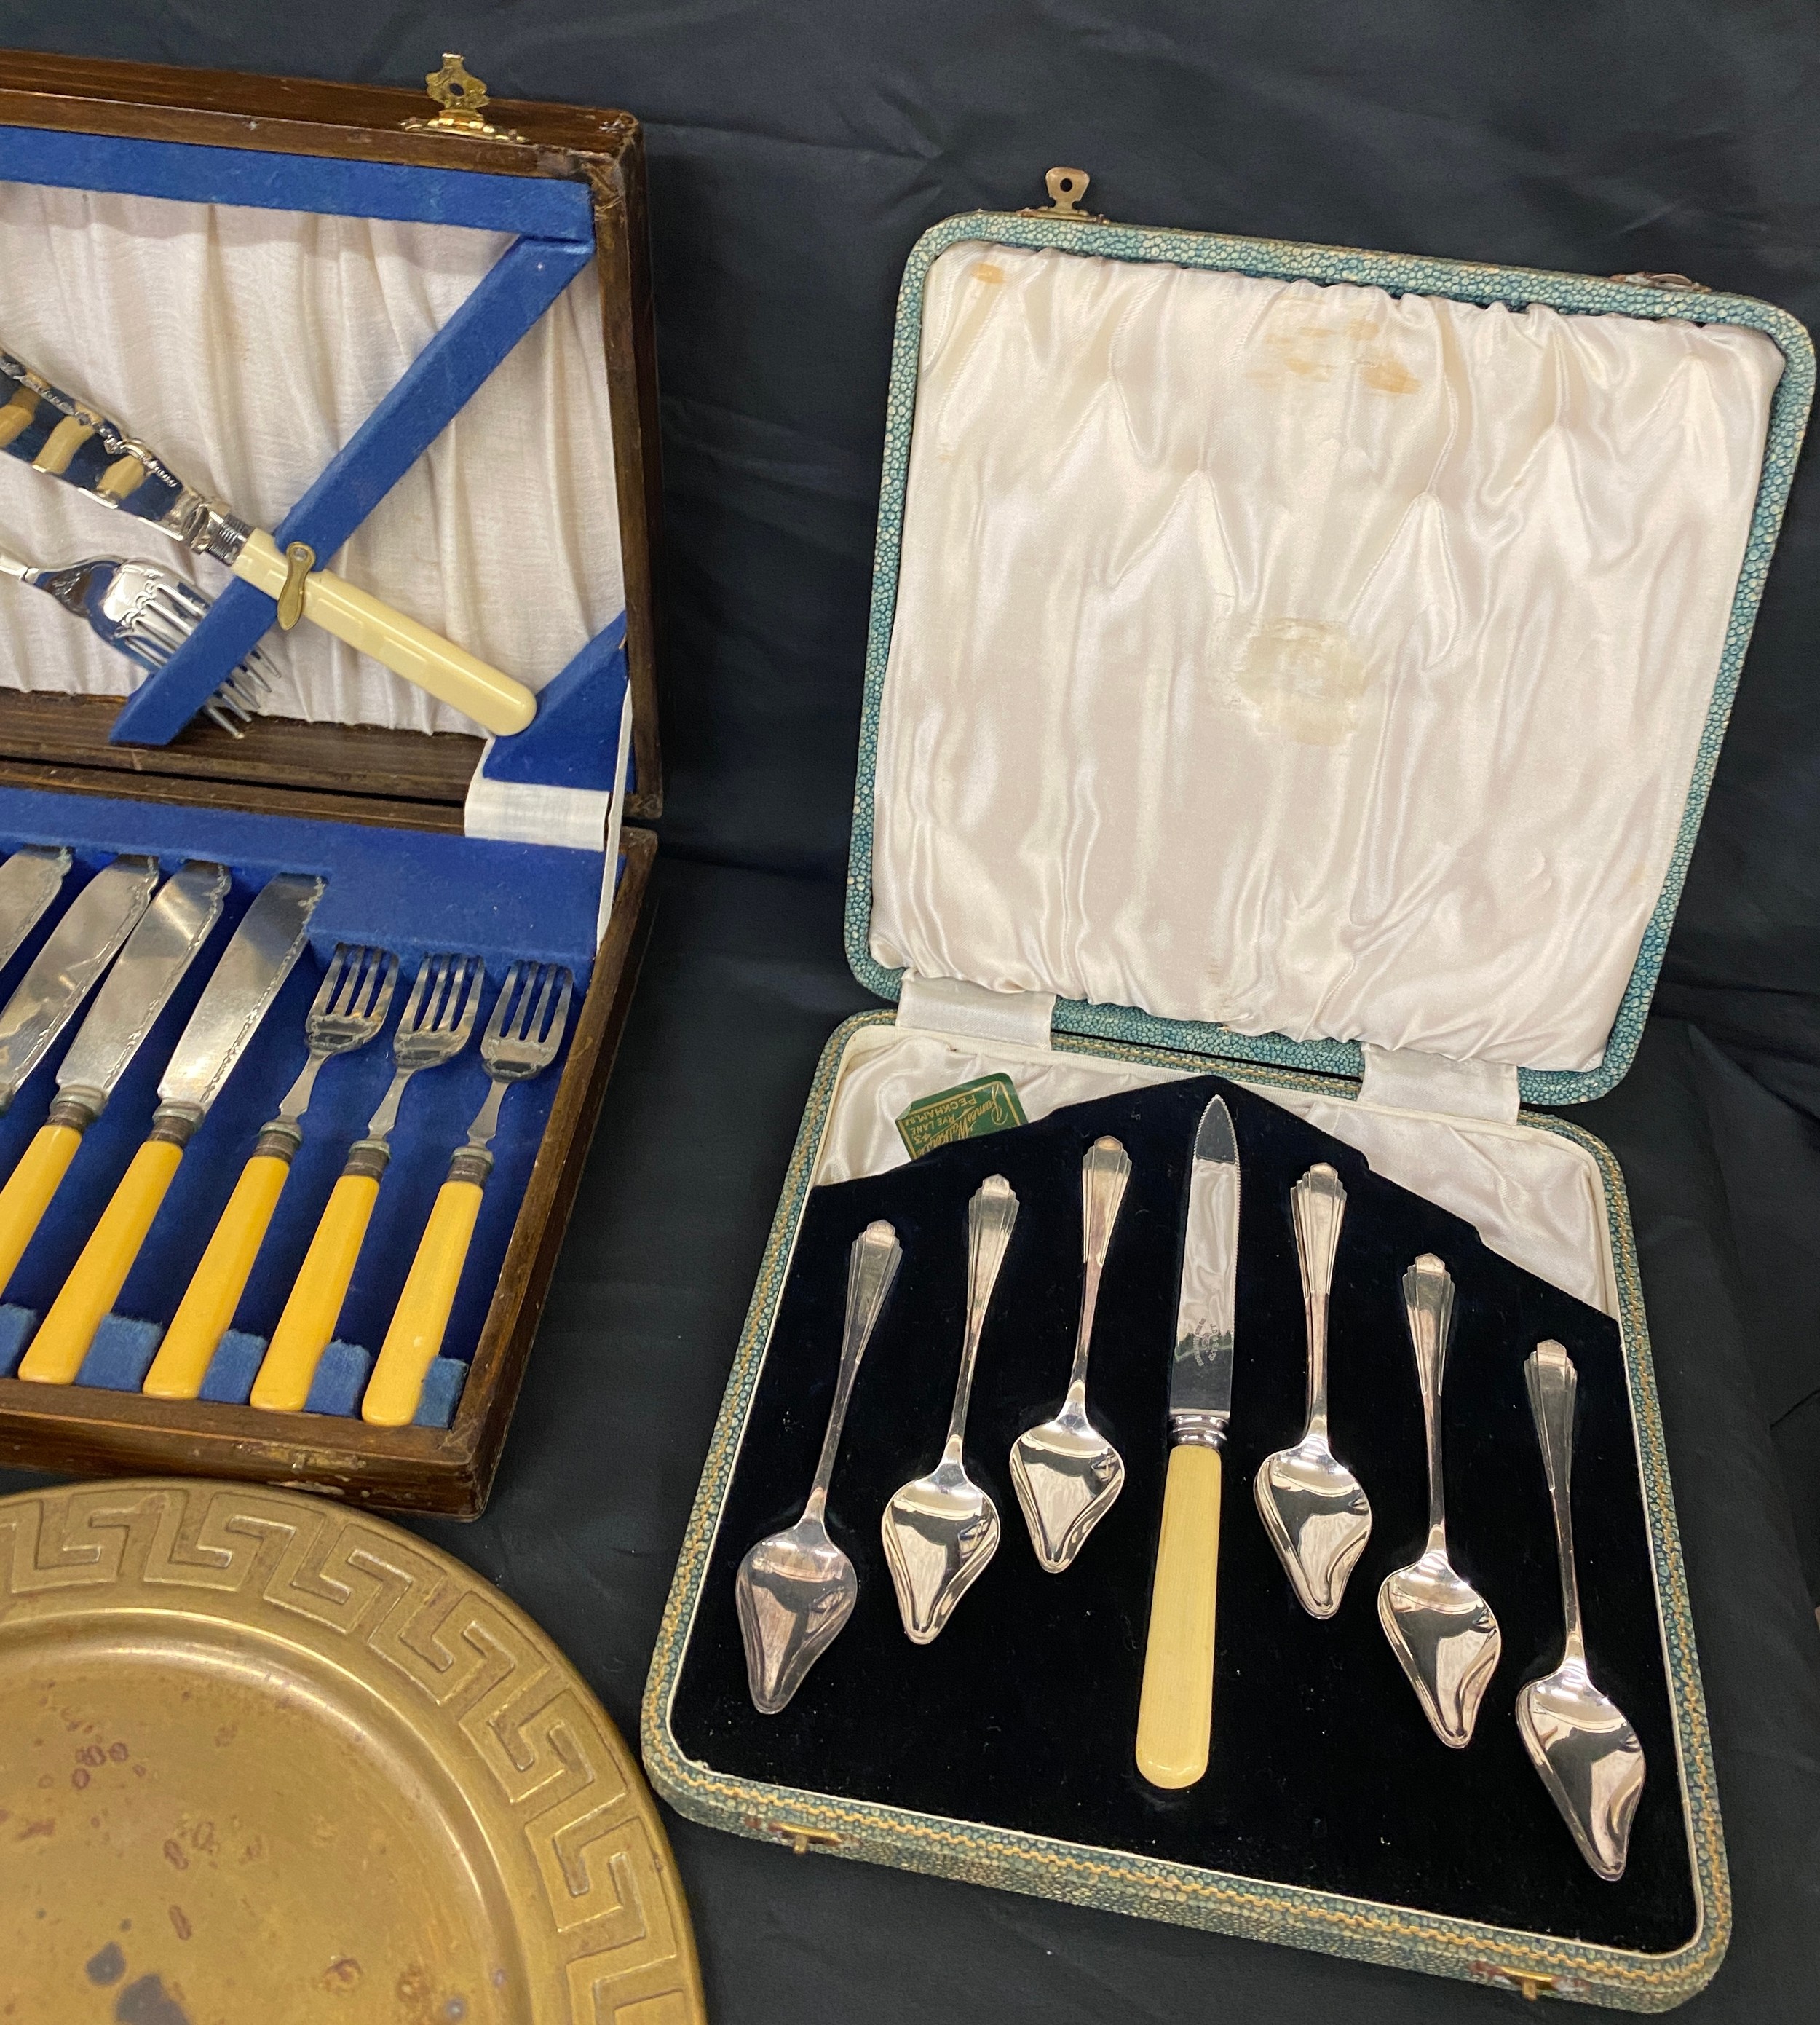 3 cased silver plated cutlery sets, 2 silver plated small small circular trays, 1 brass tray - Image 5 of 5